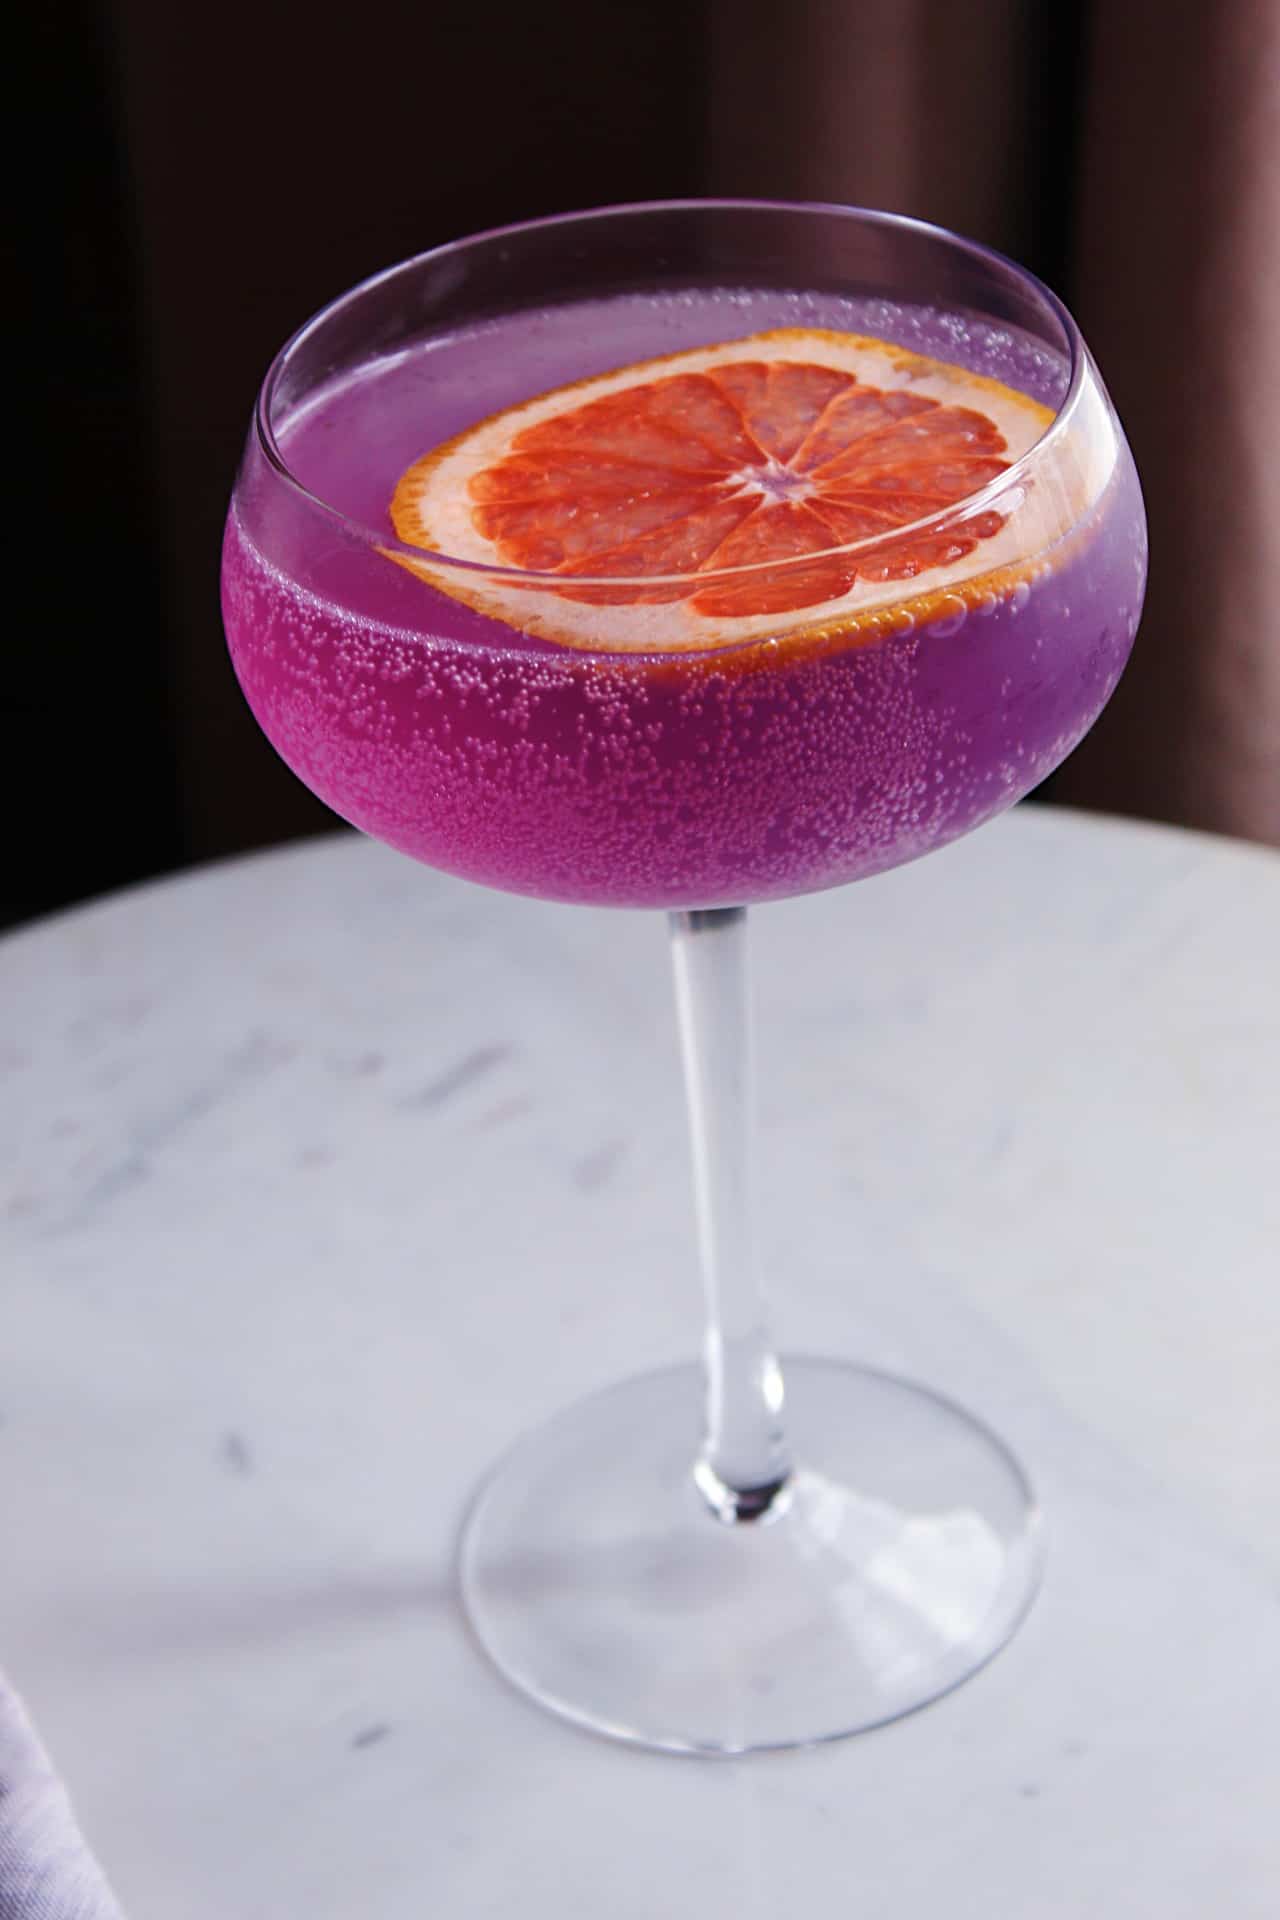 Pink/purple Grapefruit Gin Cocktail with grapefruit garnish in couple glass.